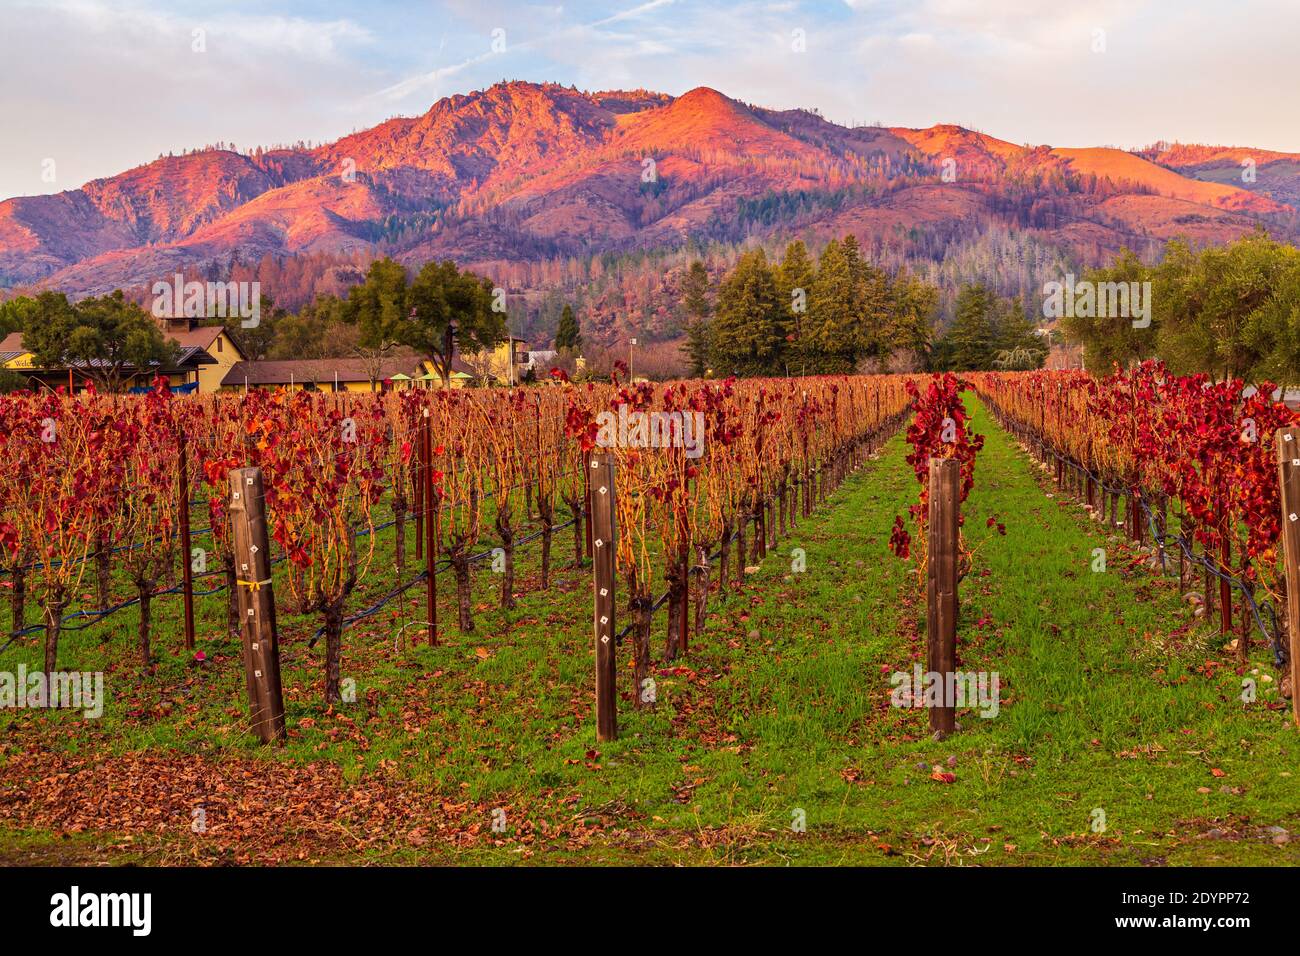 Vineyards bathed in the glory of autumn golden light Napa Valley Stock Photo